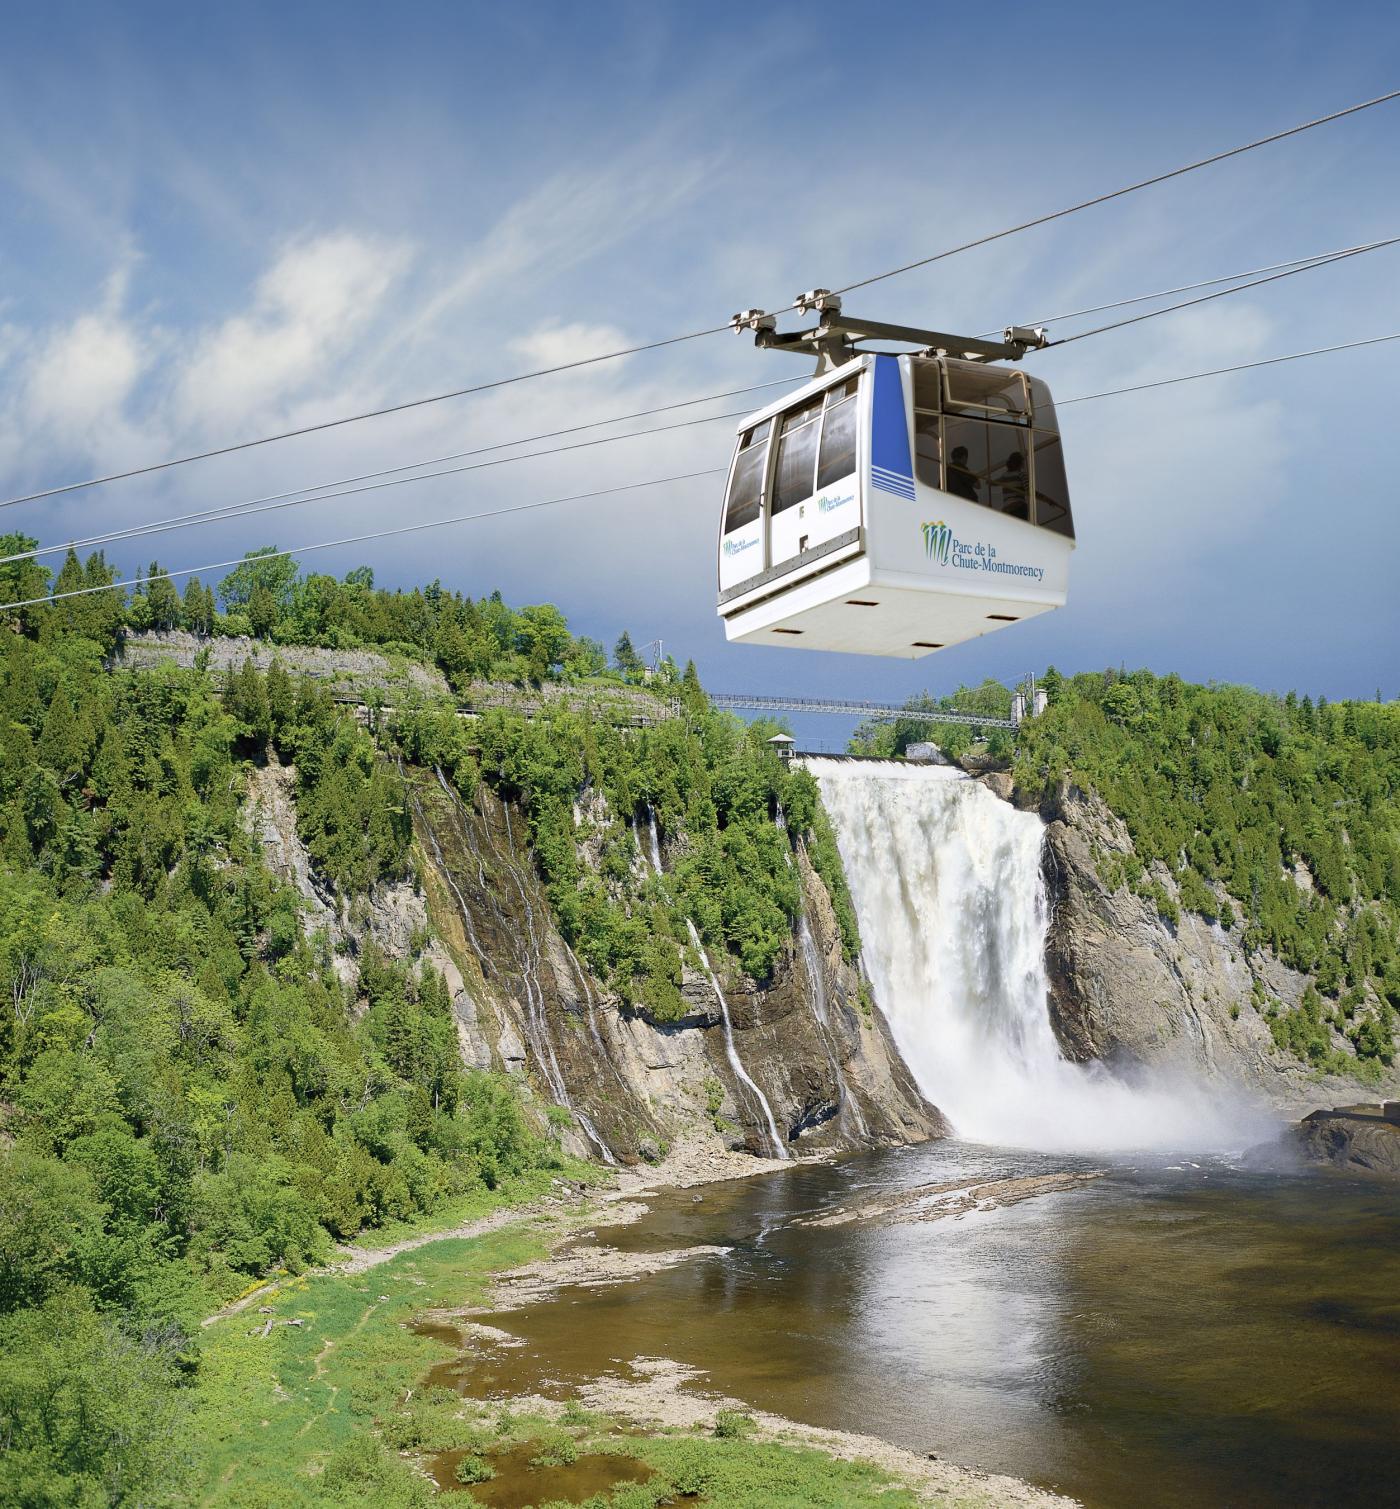 The Parc de la Chute-Montmorency cable car with the view of the waterfall in the background.